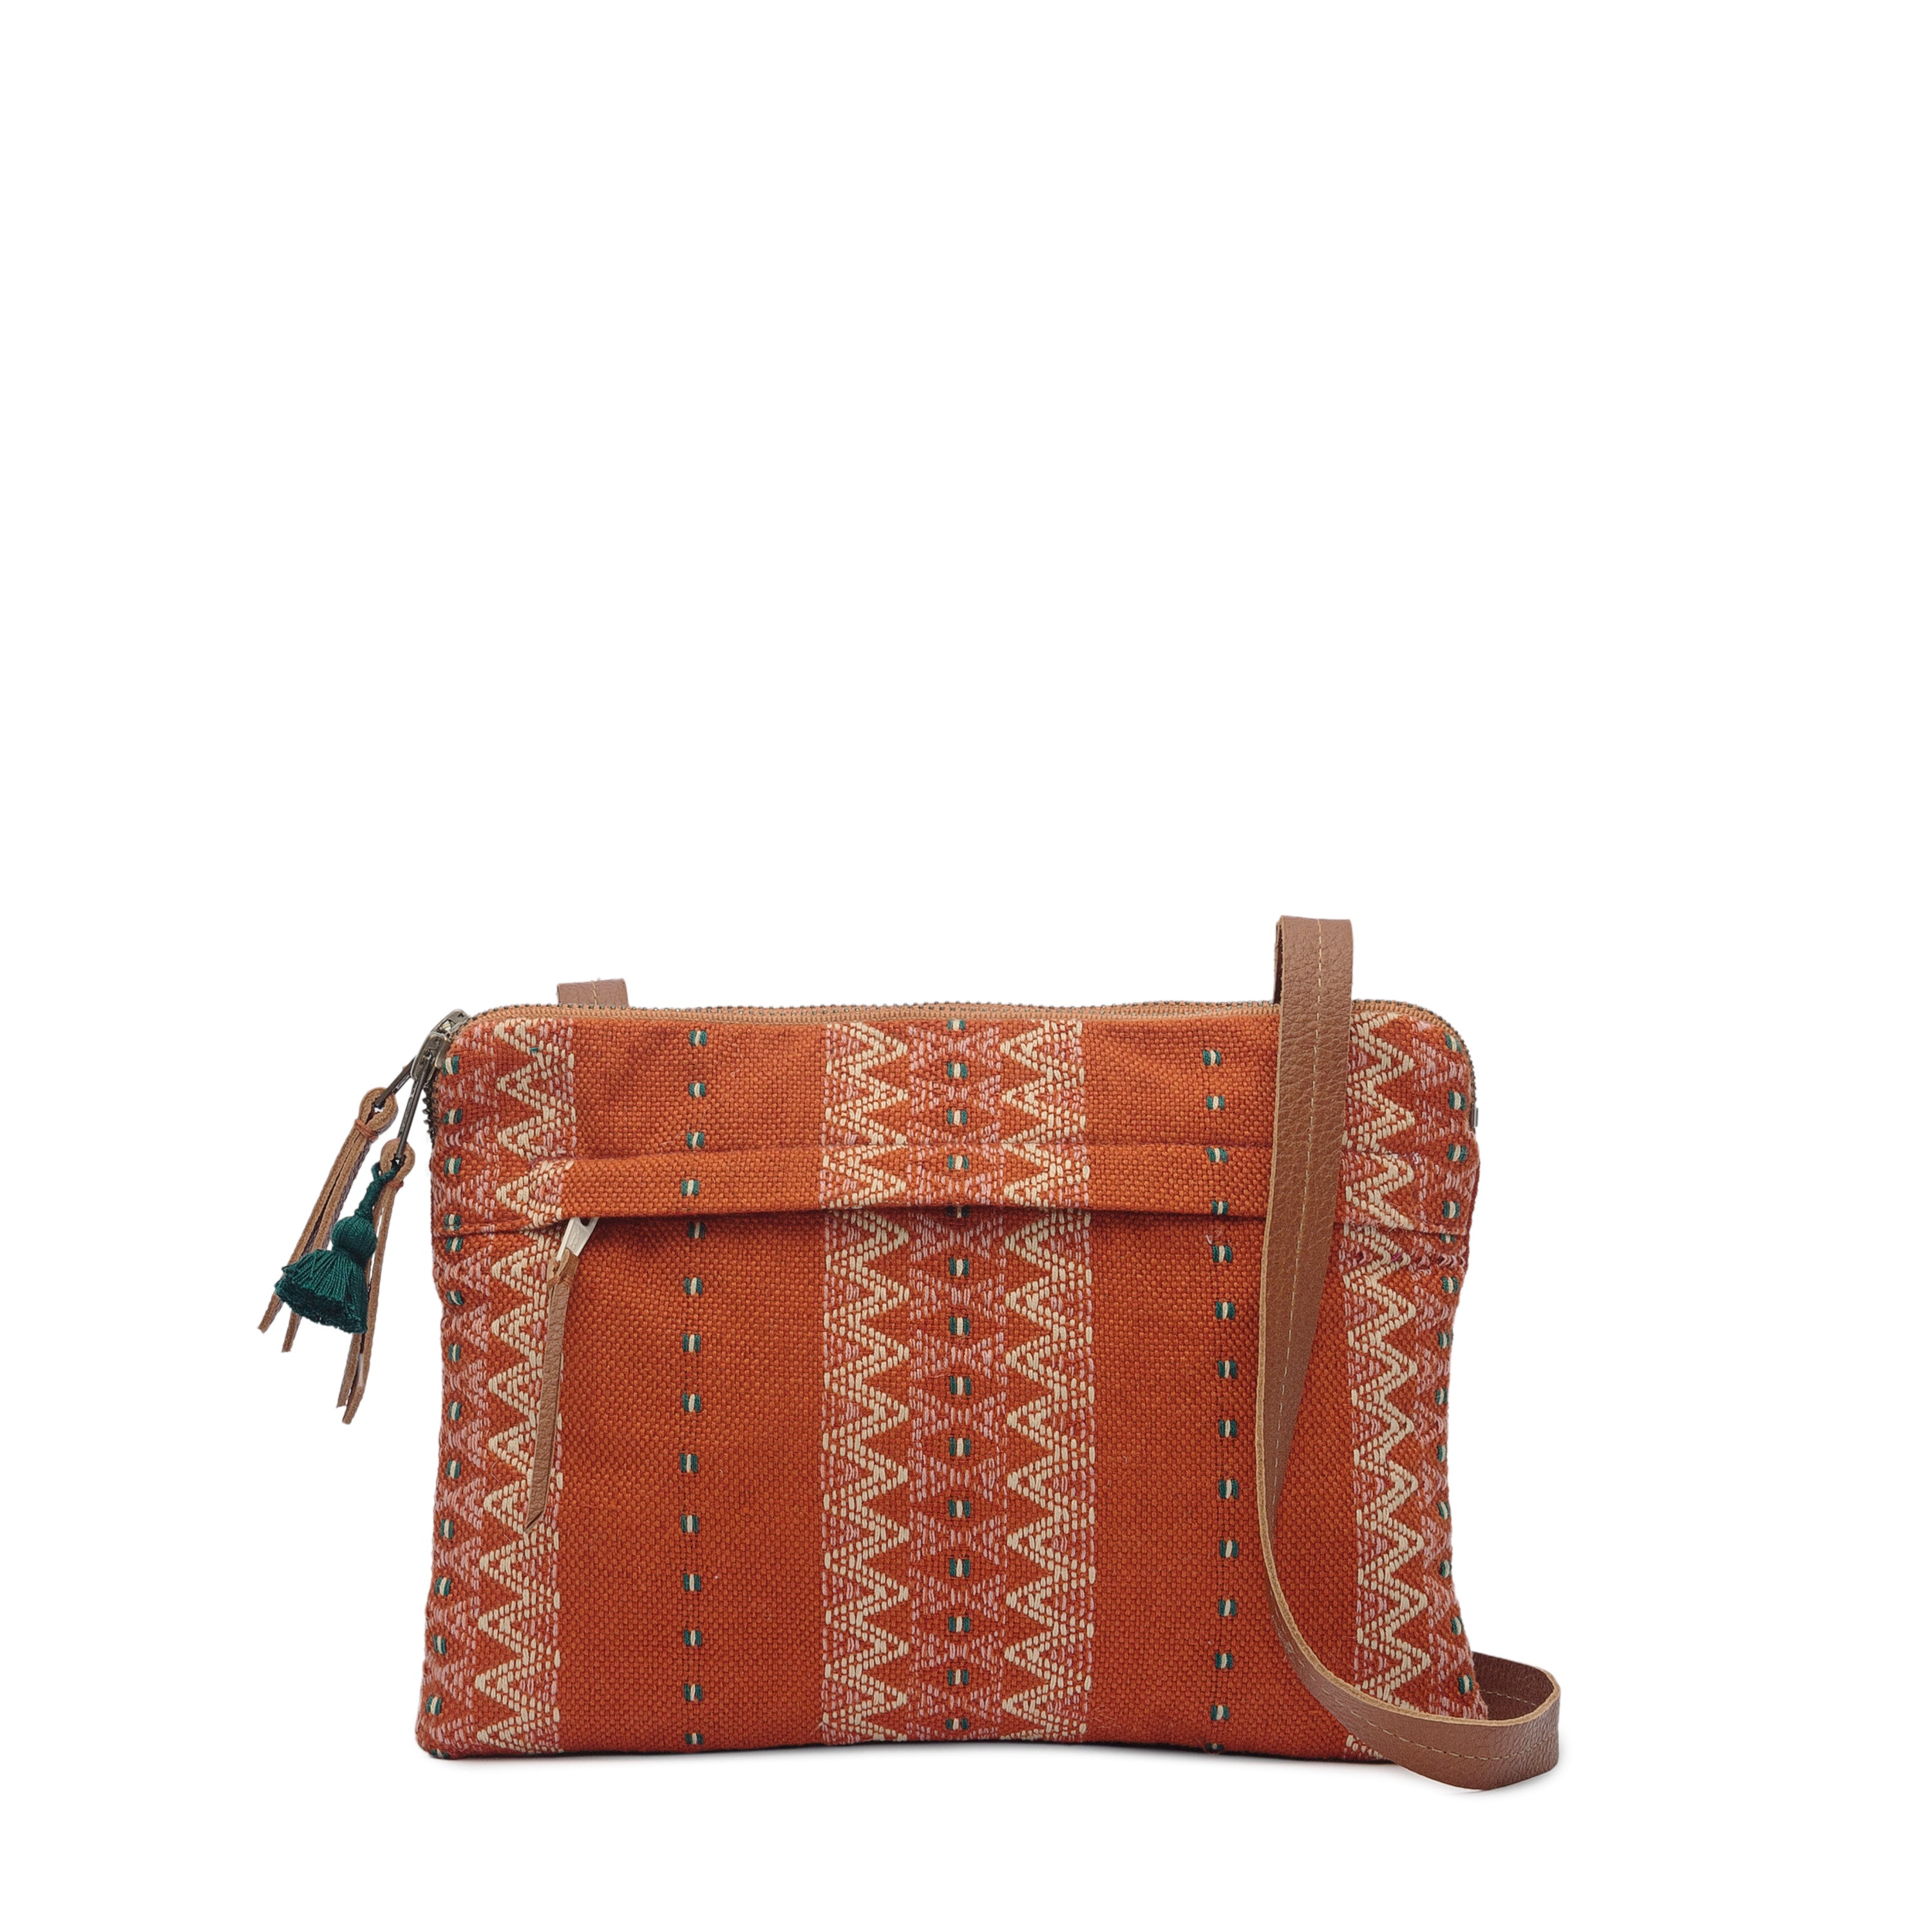 Artisan Miriam Handwoven Ginger Crossbody.  The fabric has a zigzag white pattern over an orange background. It has a phthalo green tassel and leather zipper pulls. It has a leather strap. 